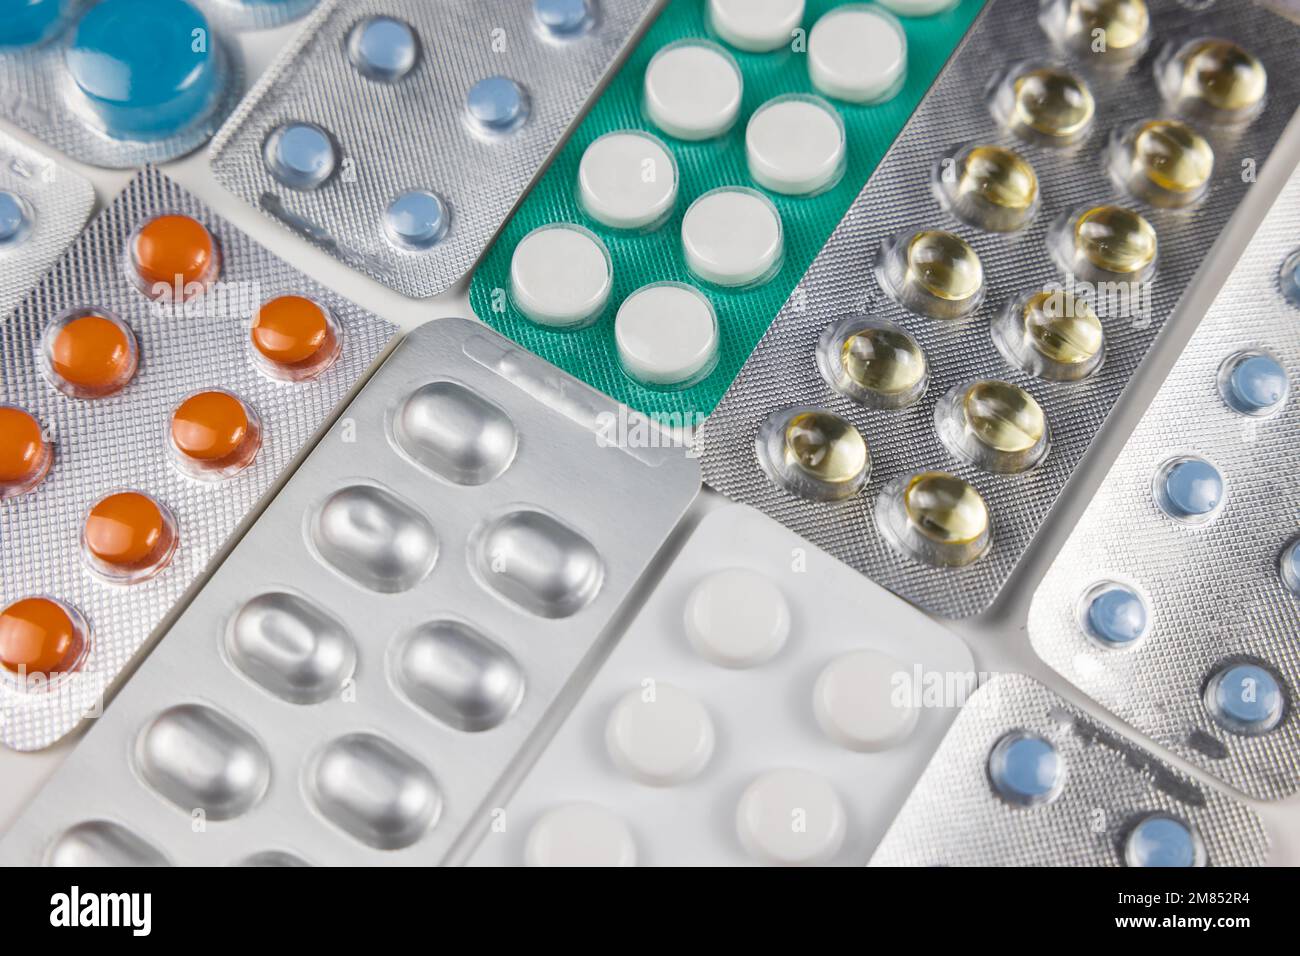 Medicine background. Various pills or medicines in the plastic blisters. pharmacy or medicament concept photo. Stock Photo